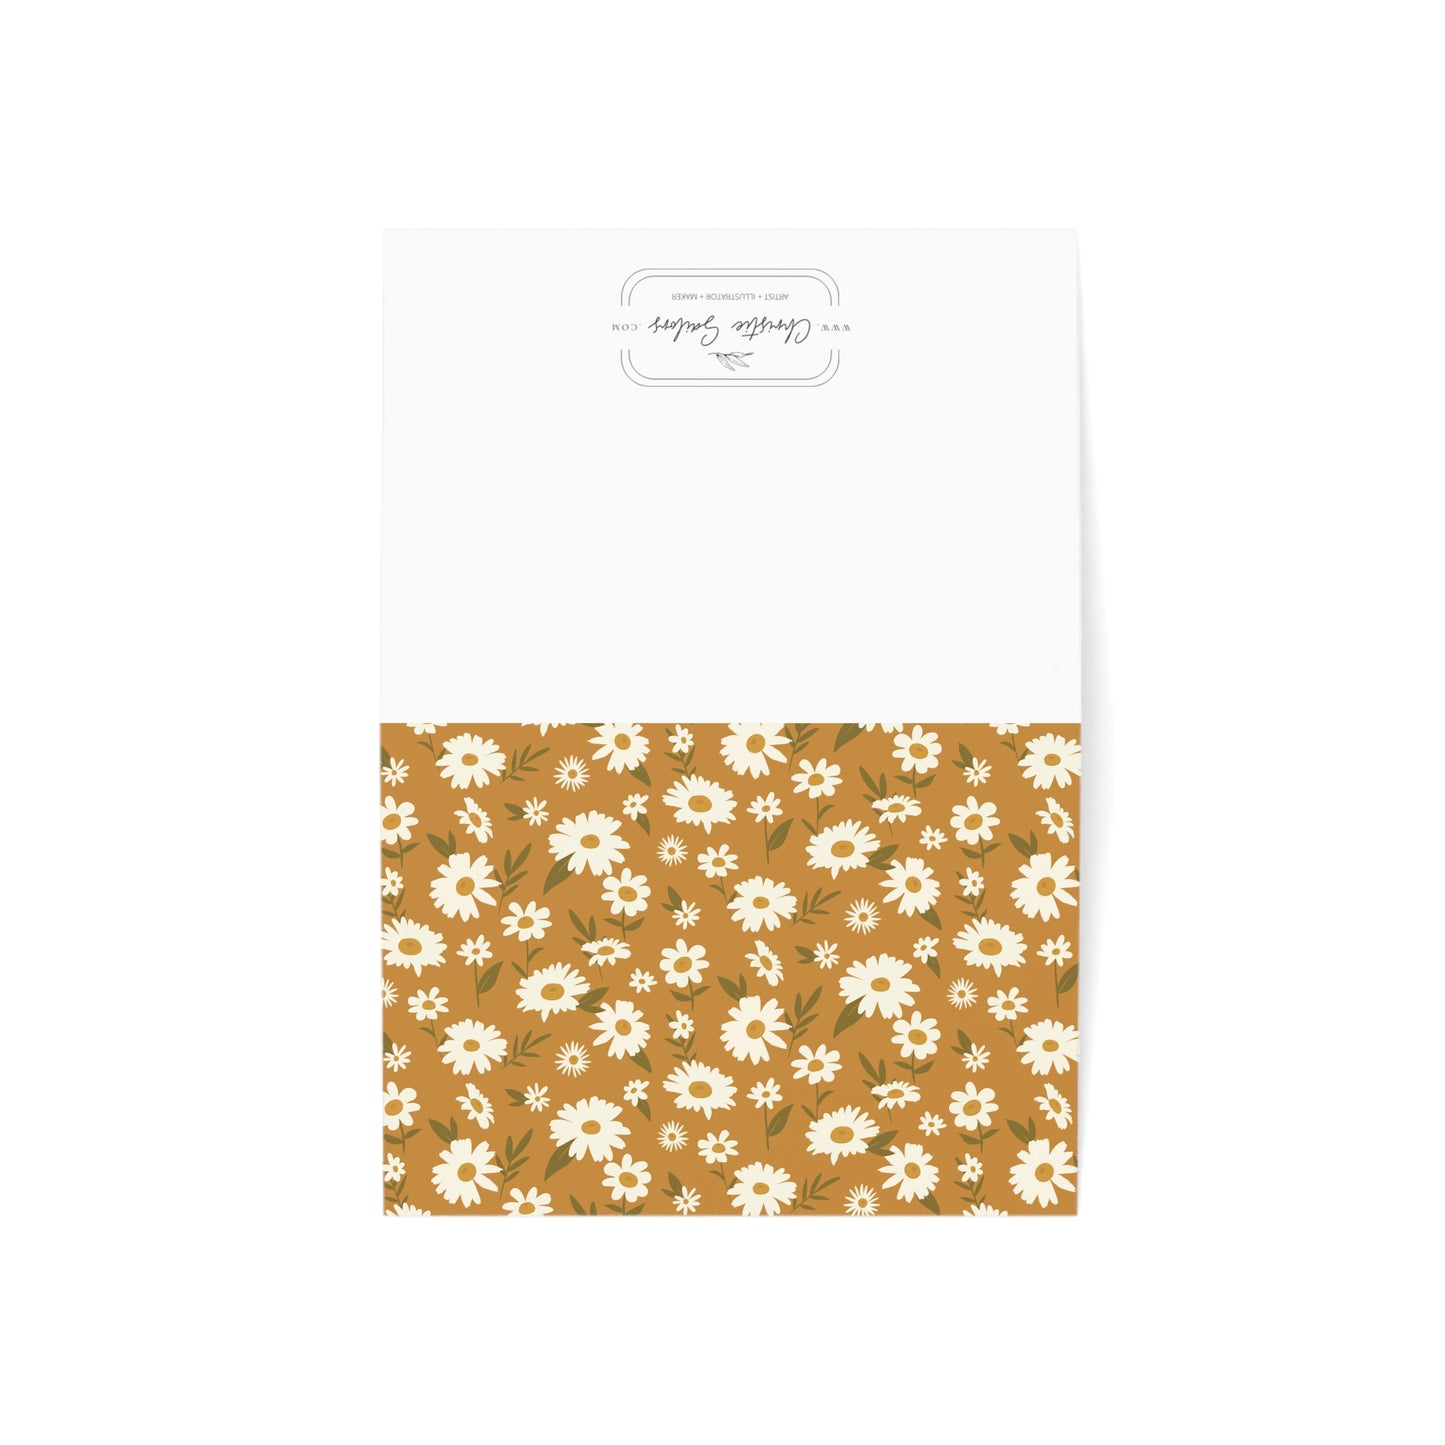 Golden Daisies Greeting Cards (1, 10, 30, and 50pcs)